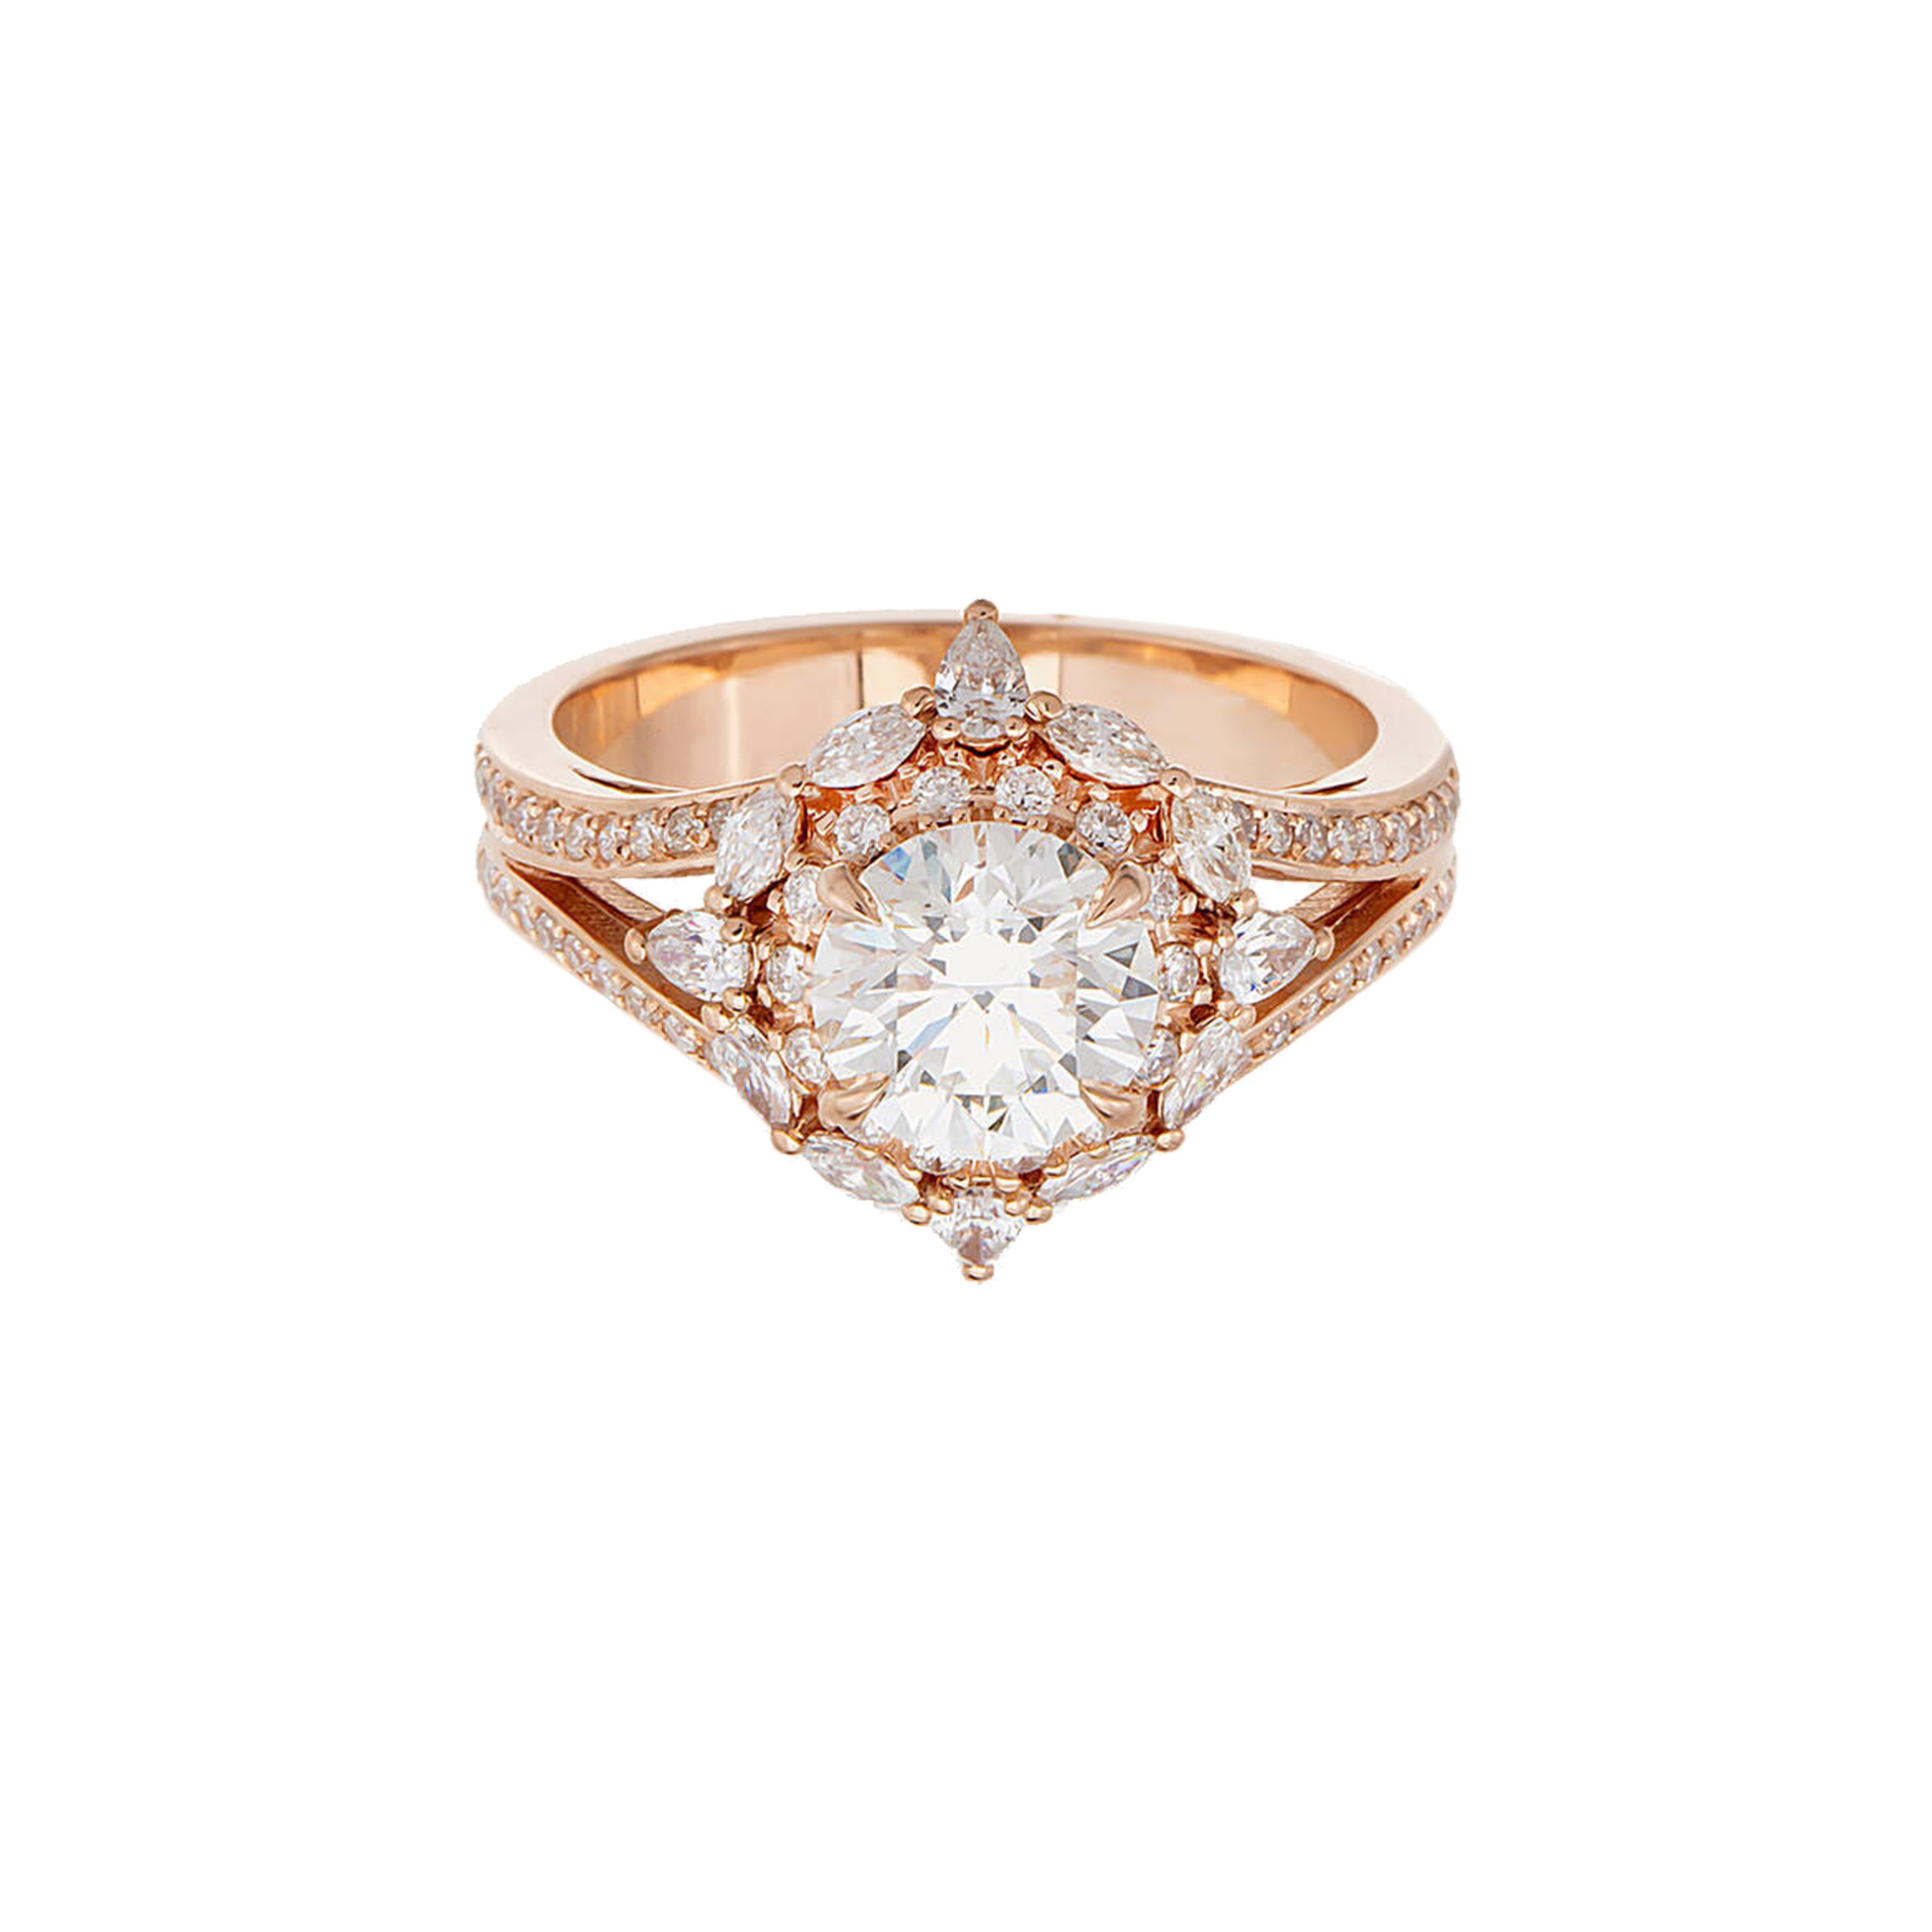 For Sale:  2.20 Carat Round, Pear and Marquise Cut Diamond 18K Rose Gold Ring 4